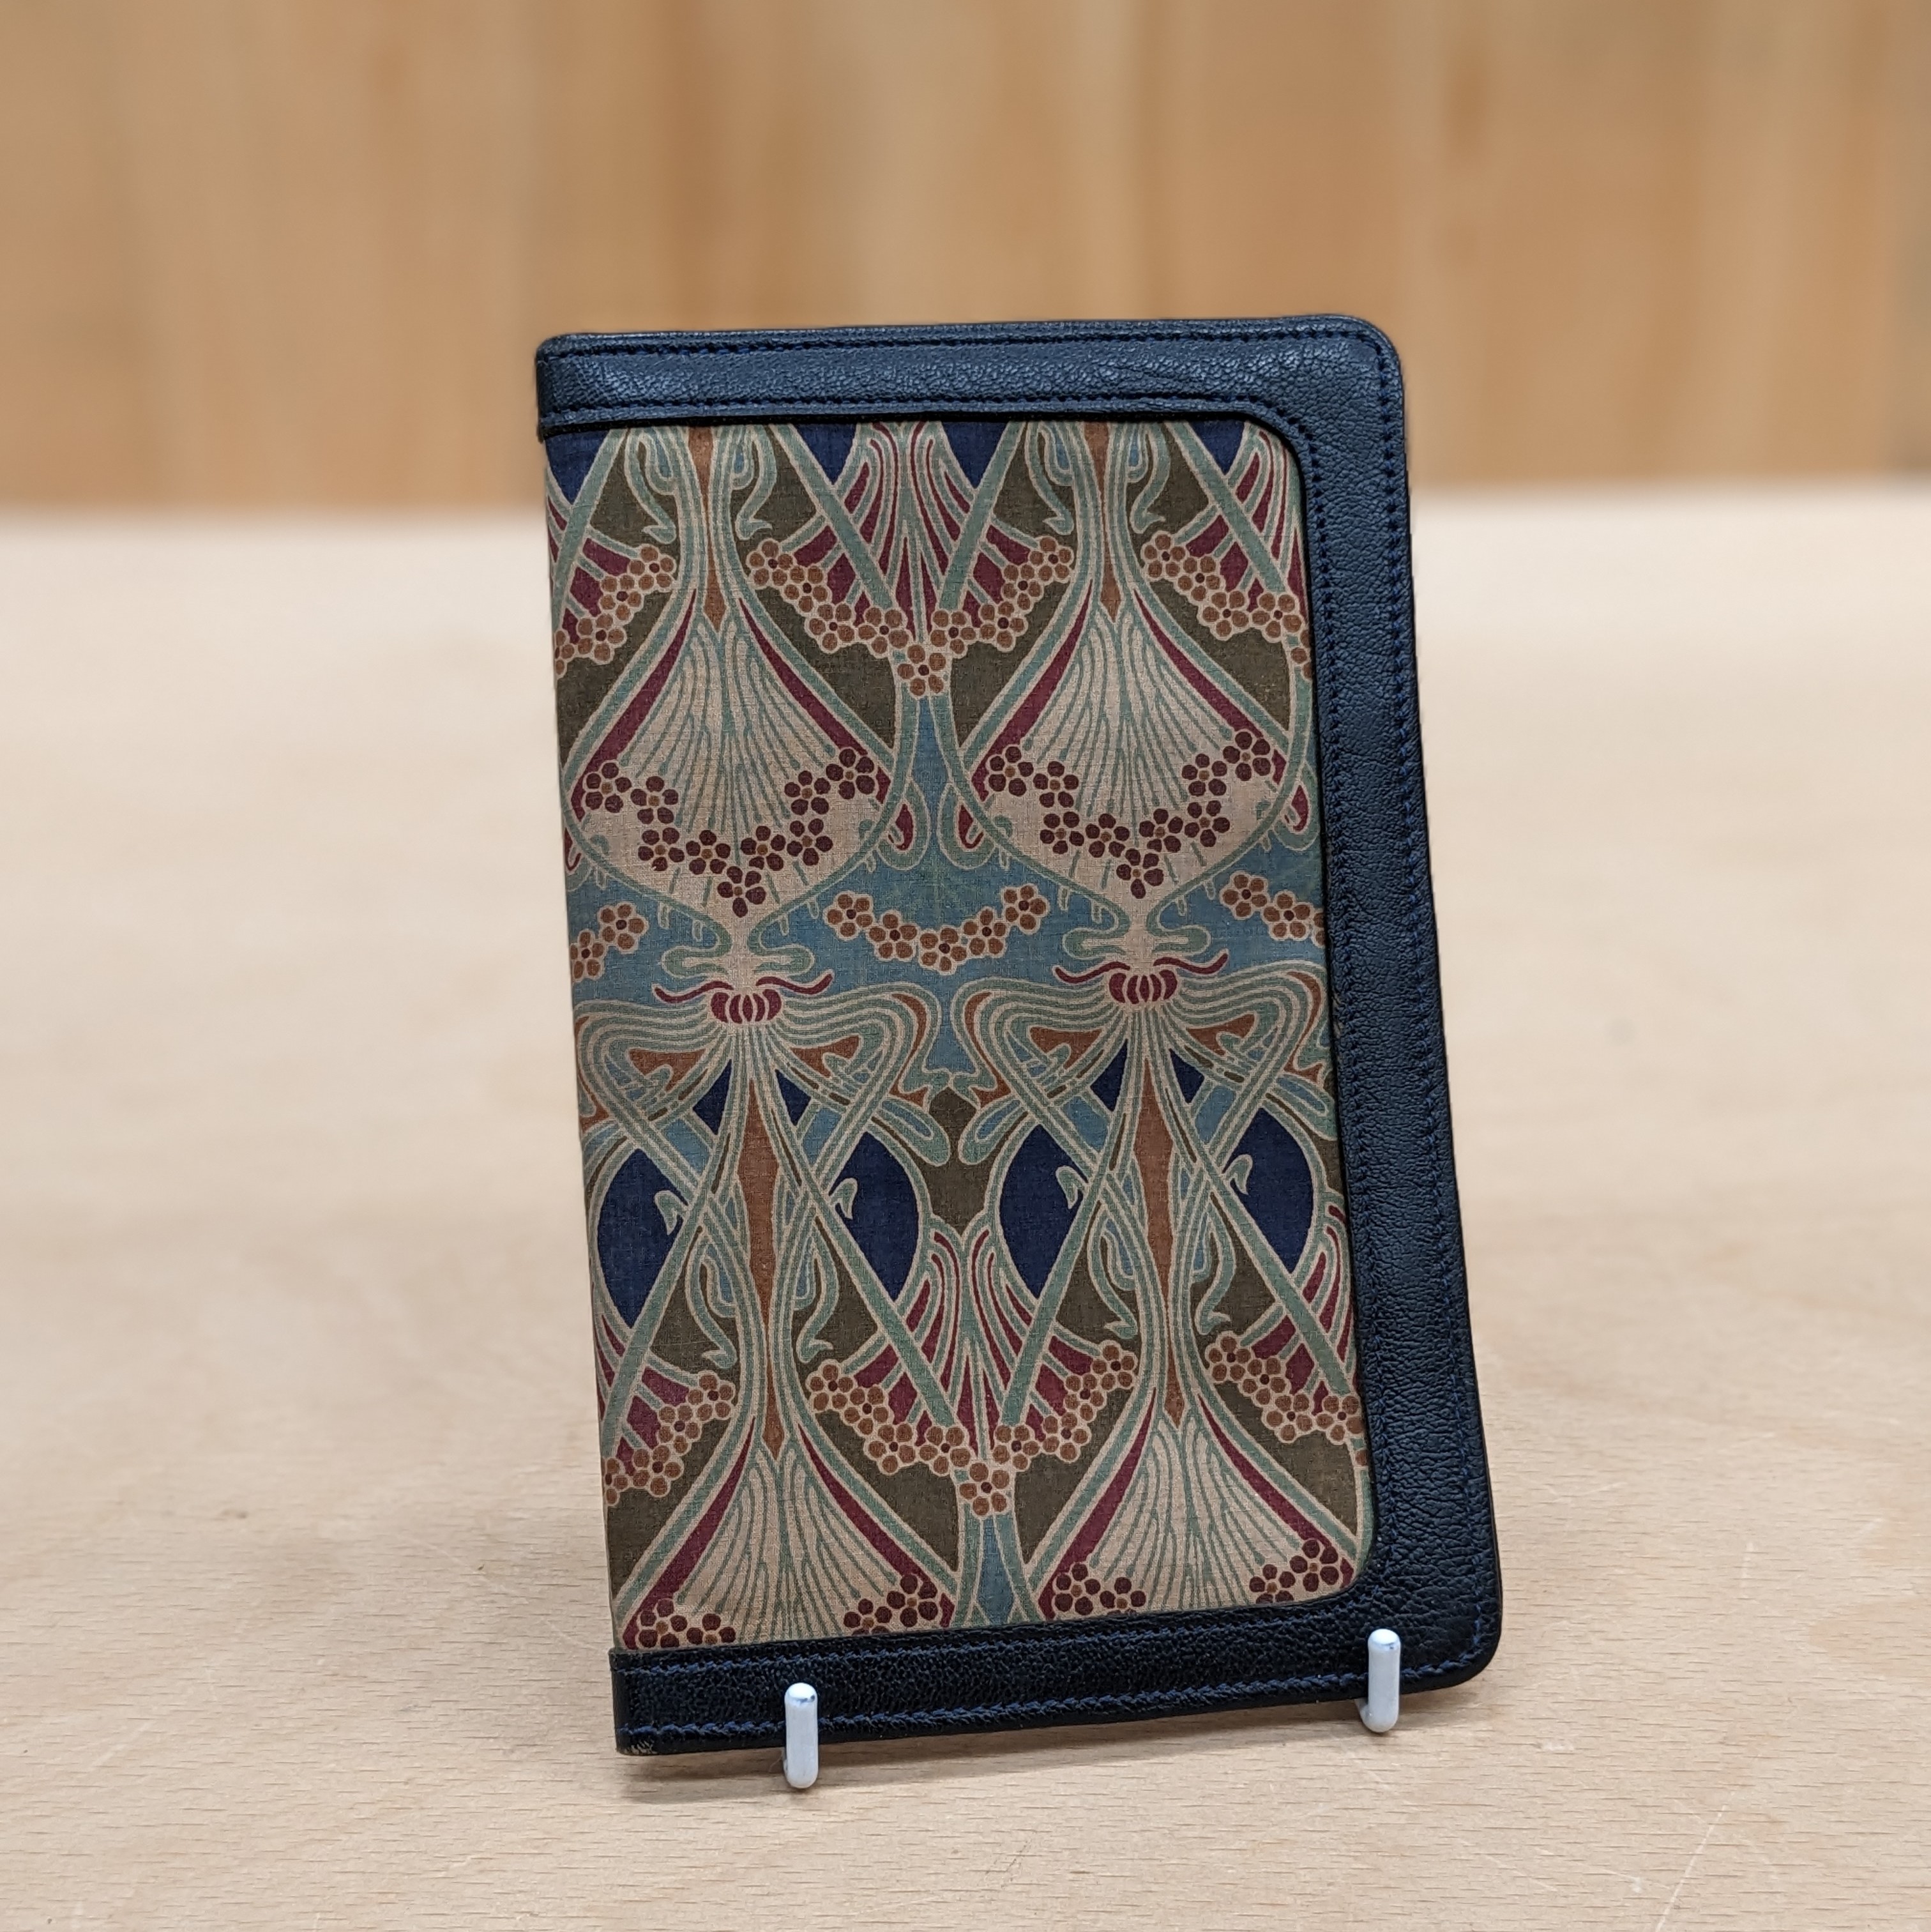 Liberty of London vintage card holder with fabric covering and leather detail